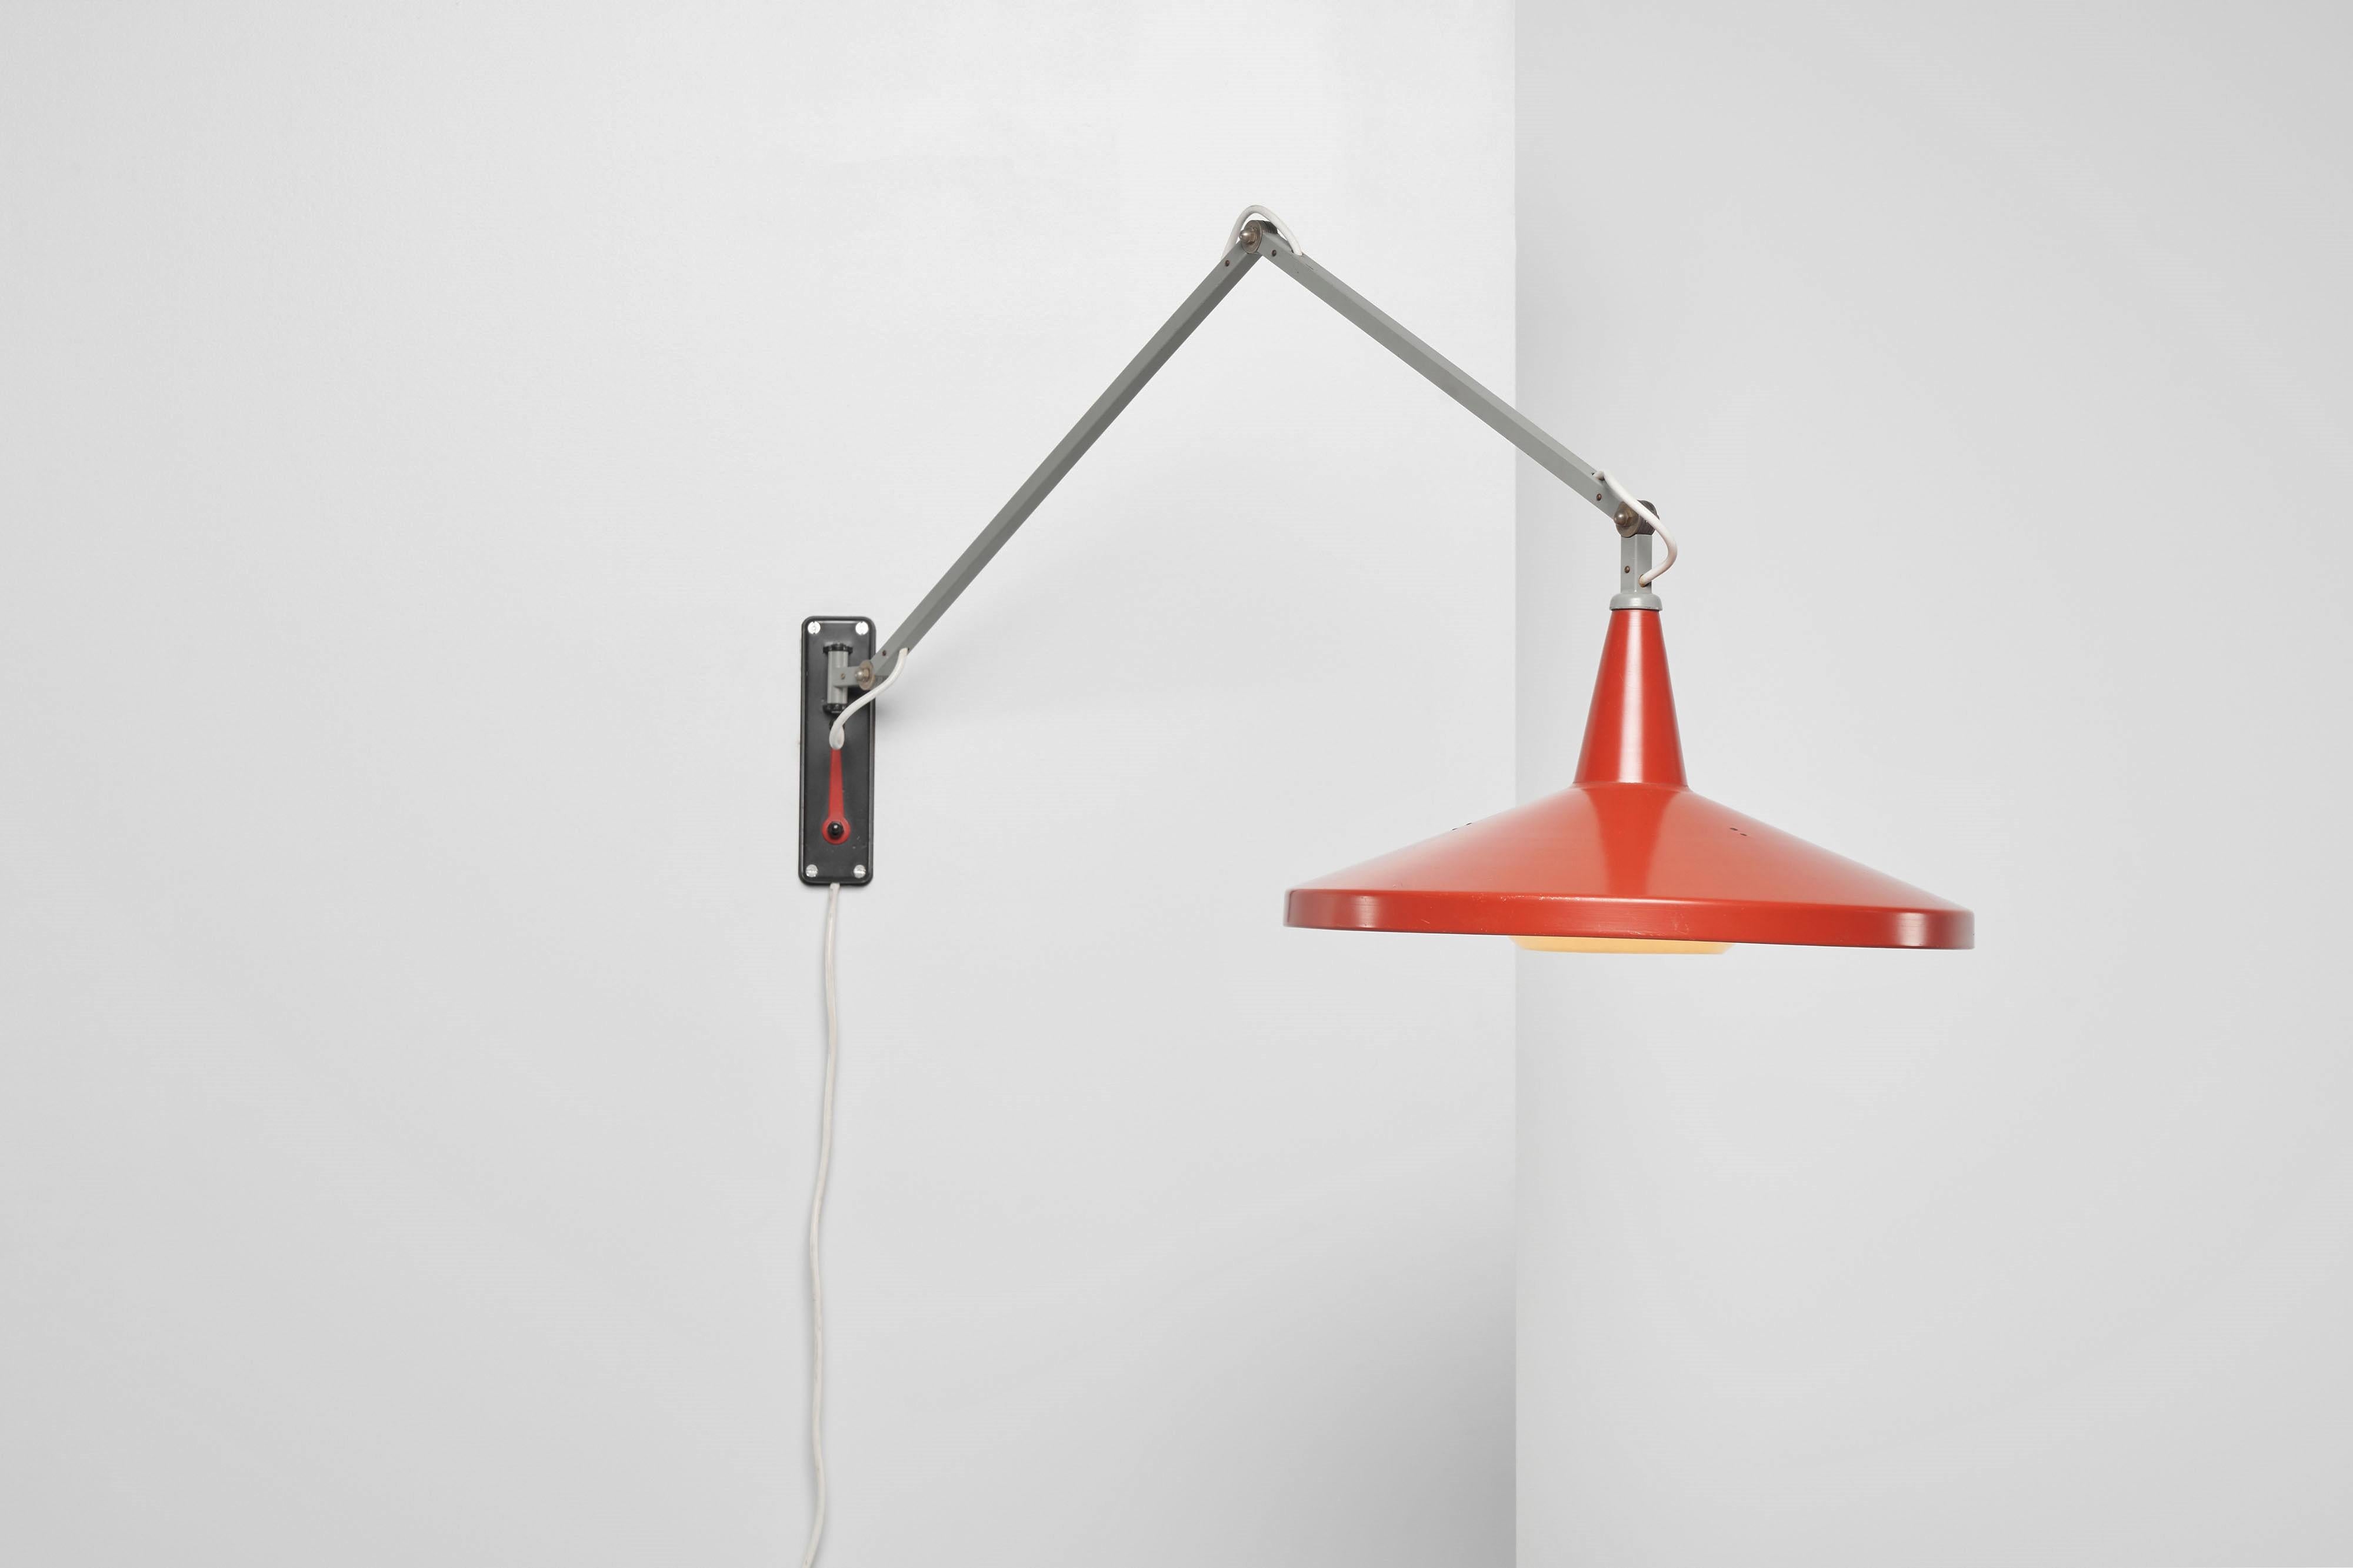 This is for a very nice industrial so called ‘Panama’ wall lamp designed by Wim Rietveld, and manufactured by Gispen Culemborg, the Netherlands 1955. Wim Rietveld was the son of famous architect and designer Gerrit Rietveld, and they also did some